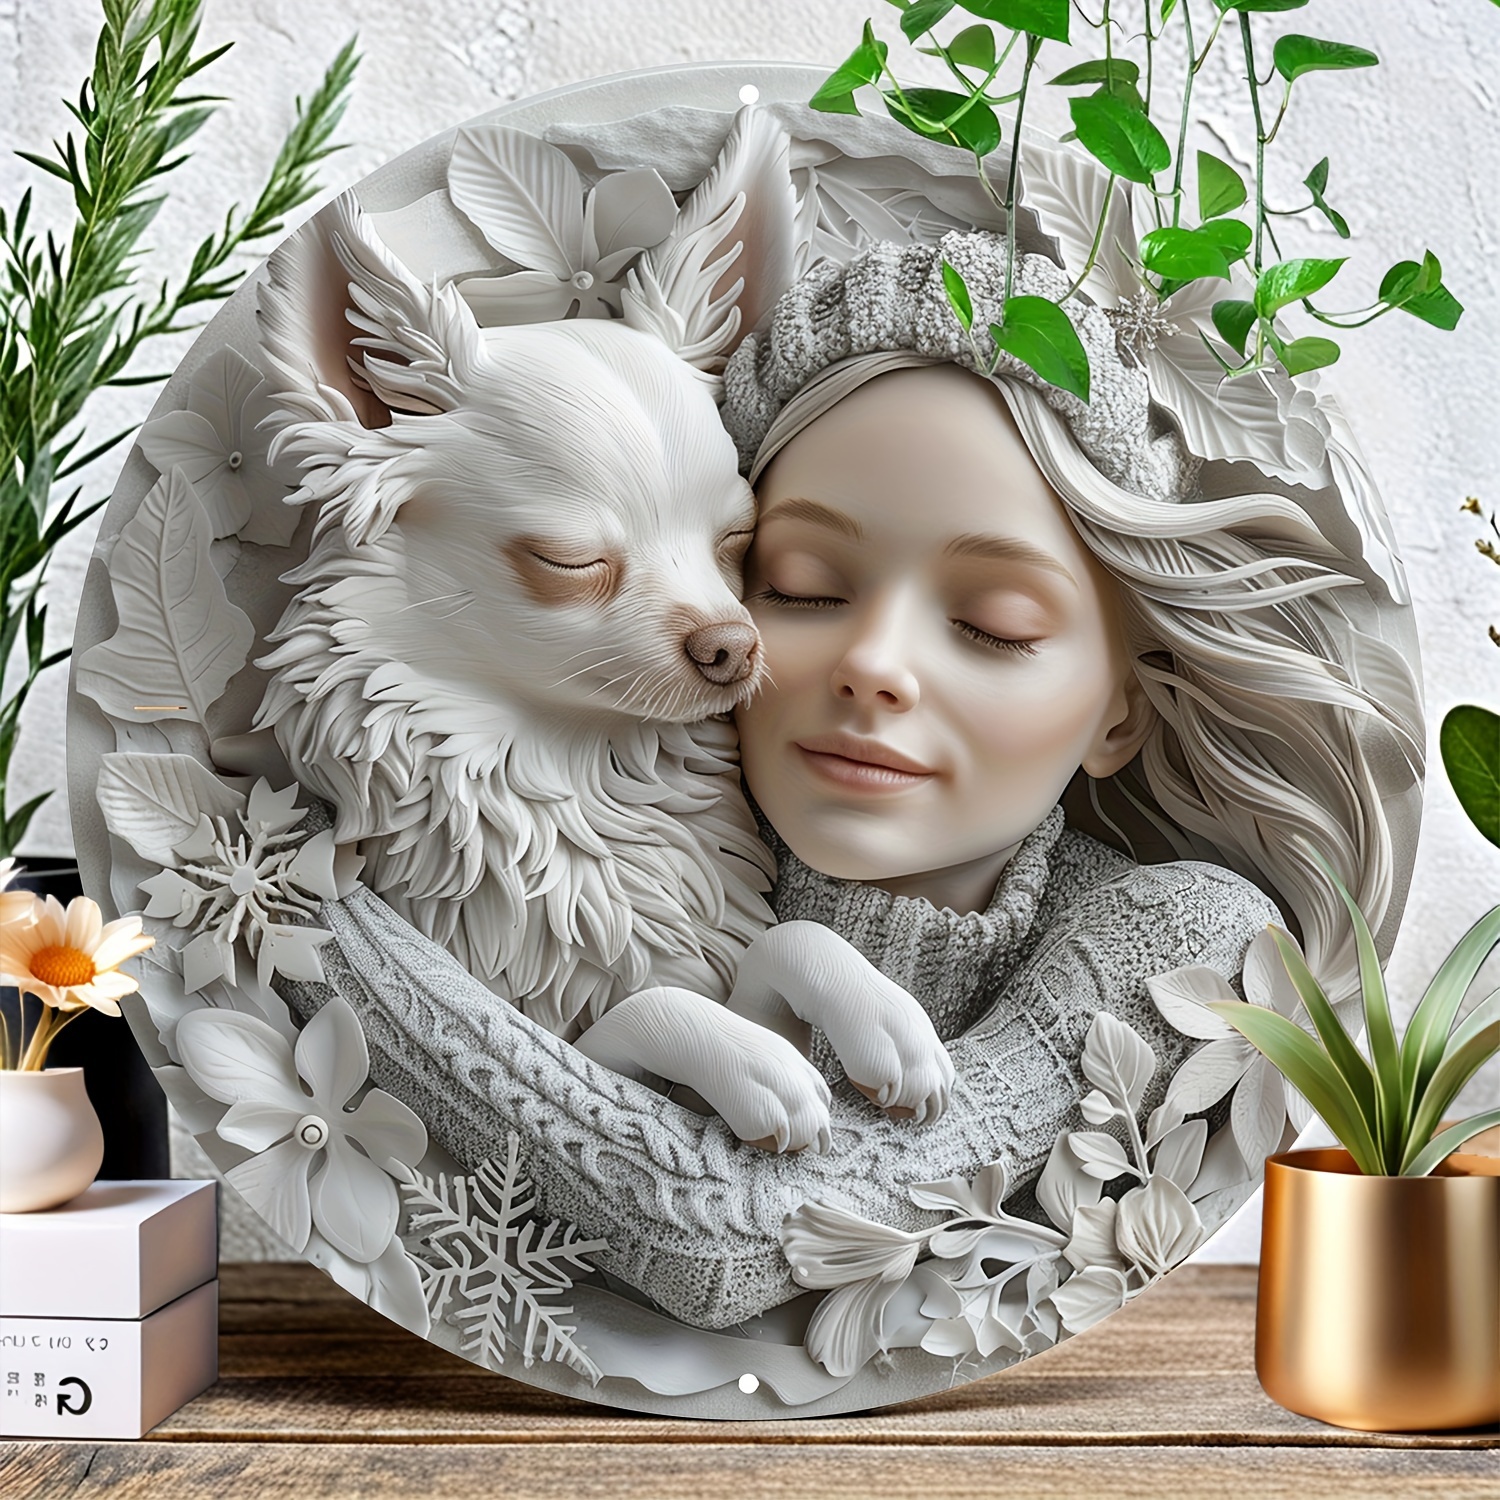 

Creative Dog Chihuahua And Woman Metal Art - 8 Inch Aluminum Wreath Hd Vivid Print - Durable, Weatherproof Home Decor For Homes, Living Spaces, And Memorable Pet Gifts